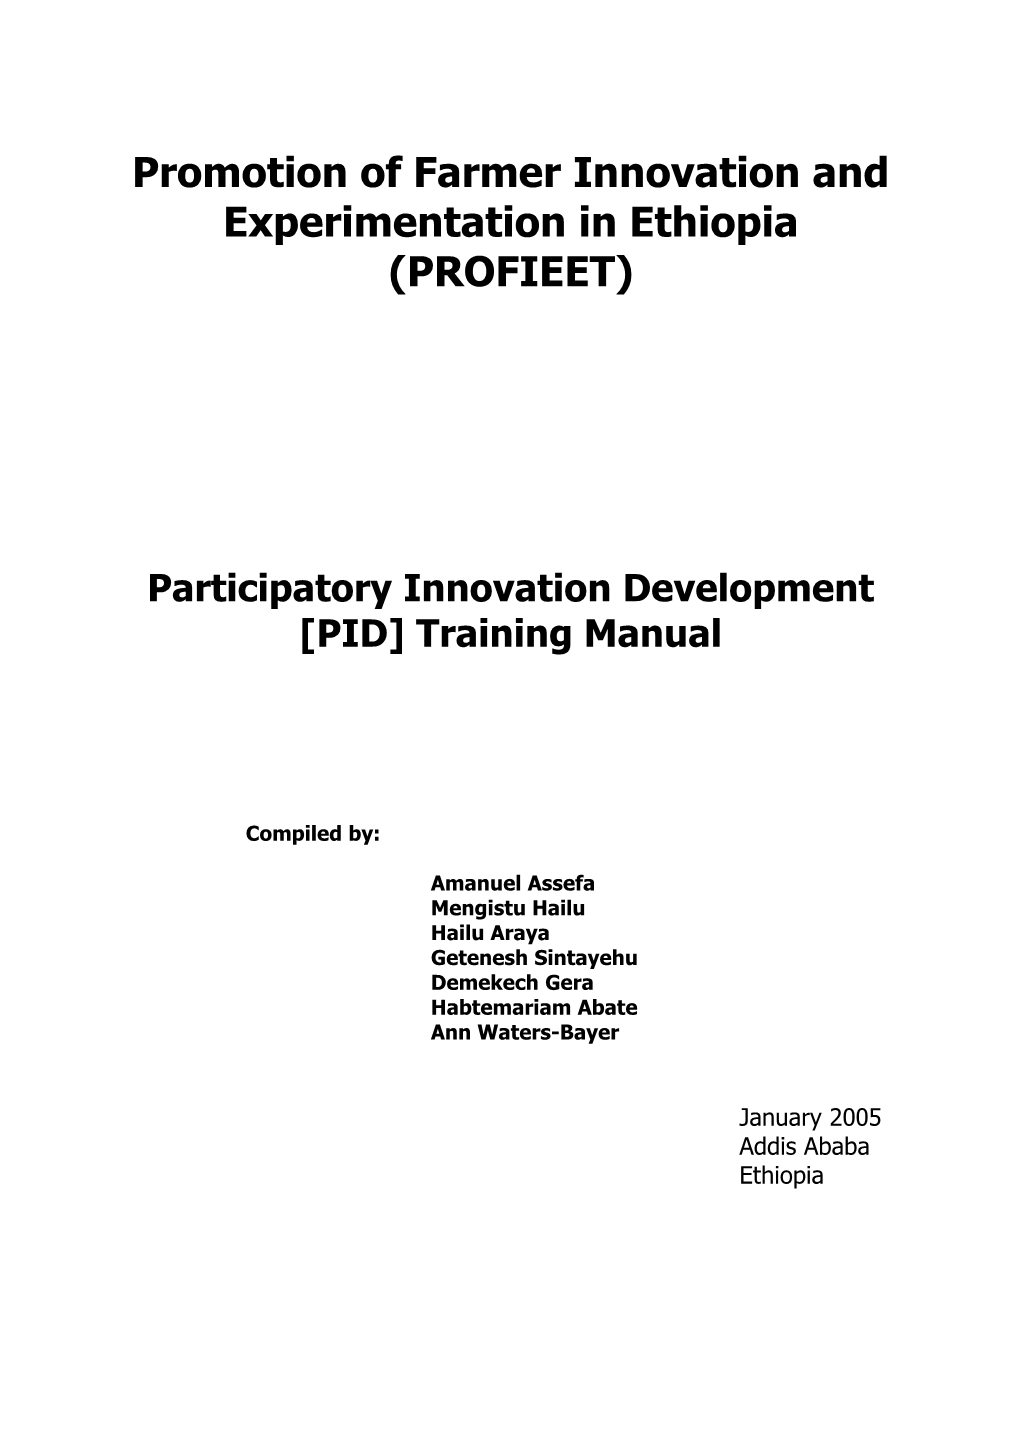 Promotion of Farmer Innovation and Experimentation in Ethiopia